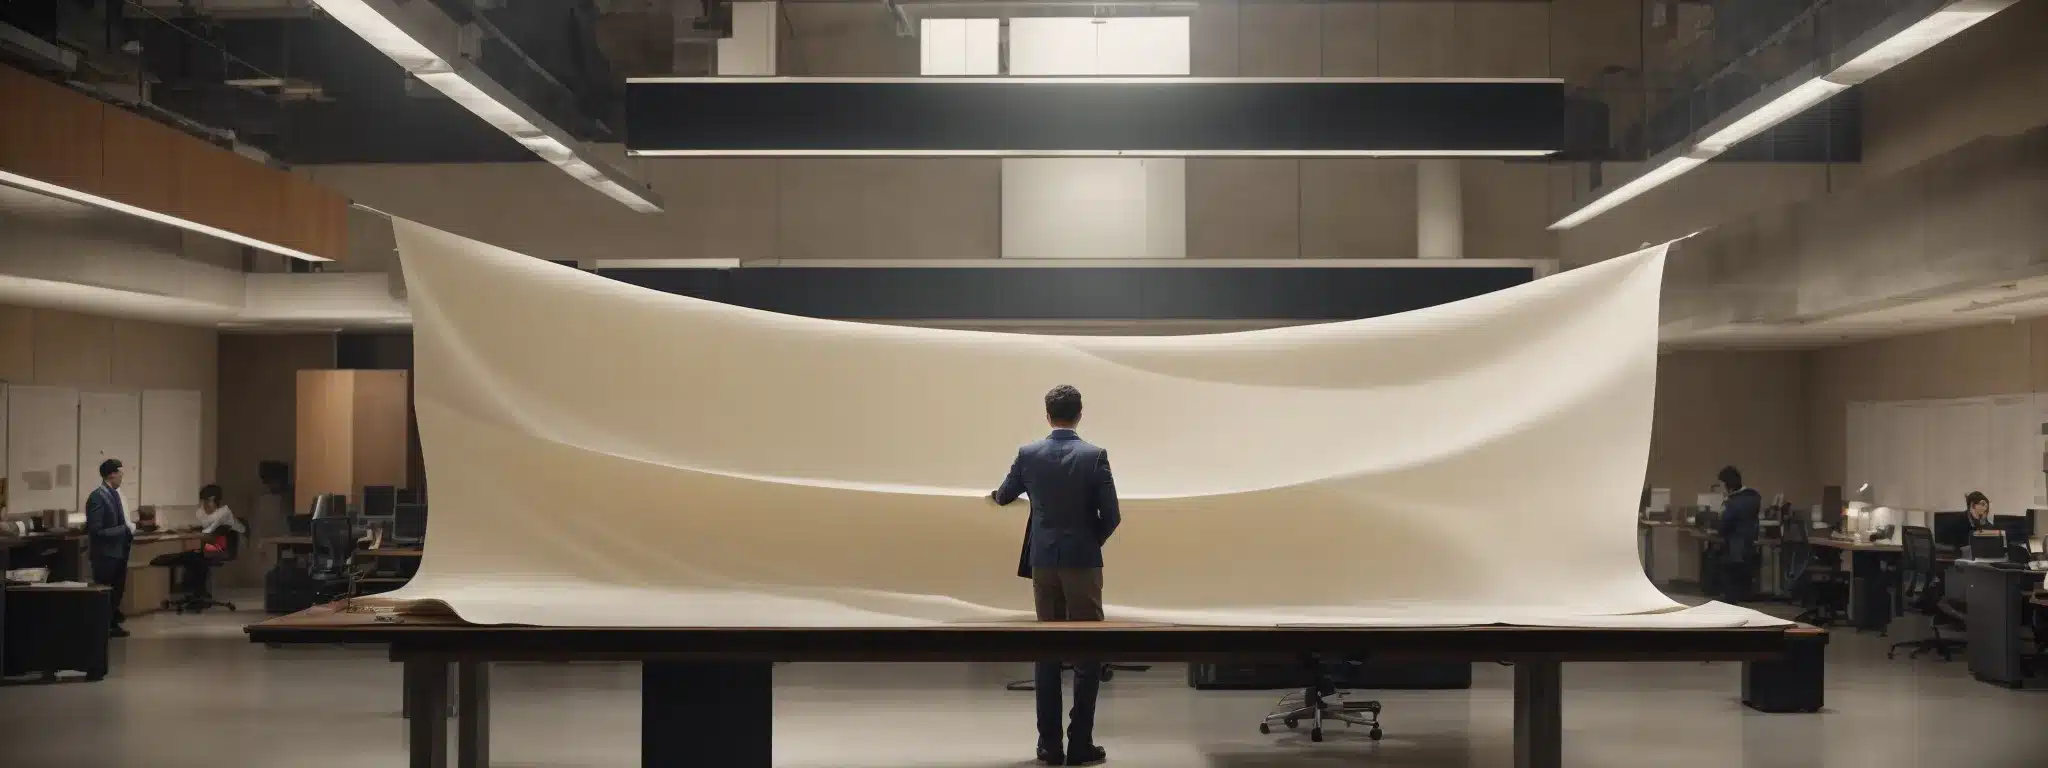 A Strategist Stands At A Table, Unfurling A Large Parchment That Symbolizes A Marketing Blueprint Amidst An Office Environment Suggestive Of A Lively Creative Hub.